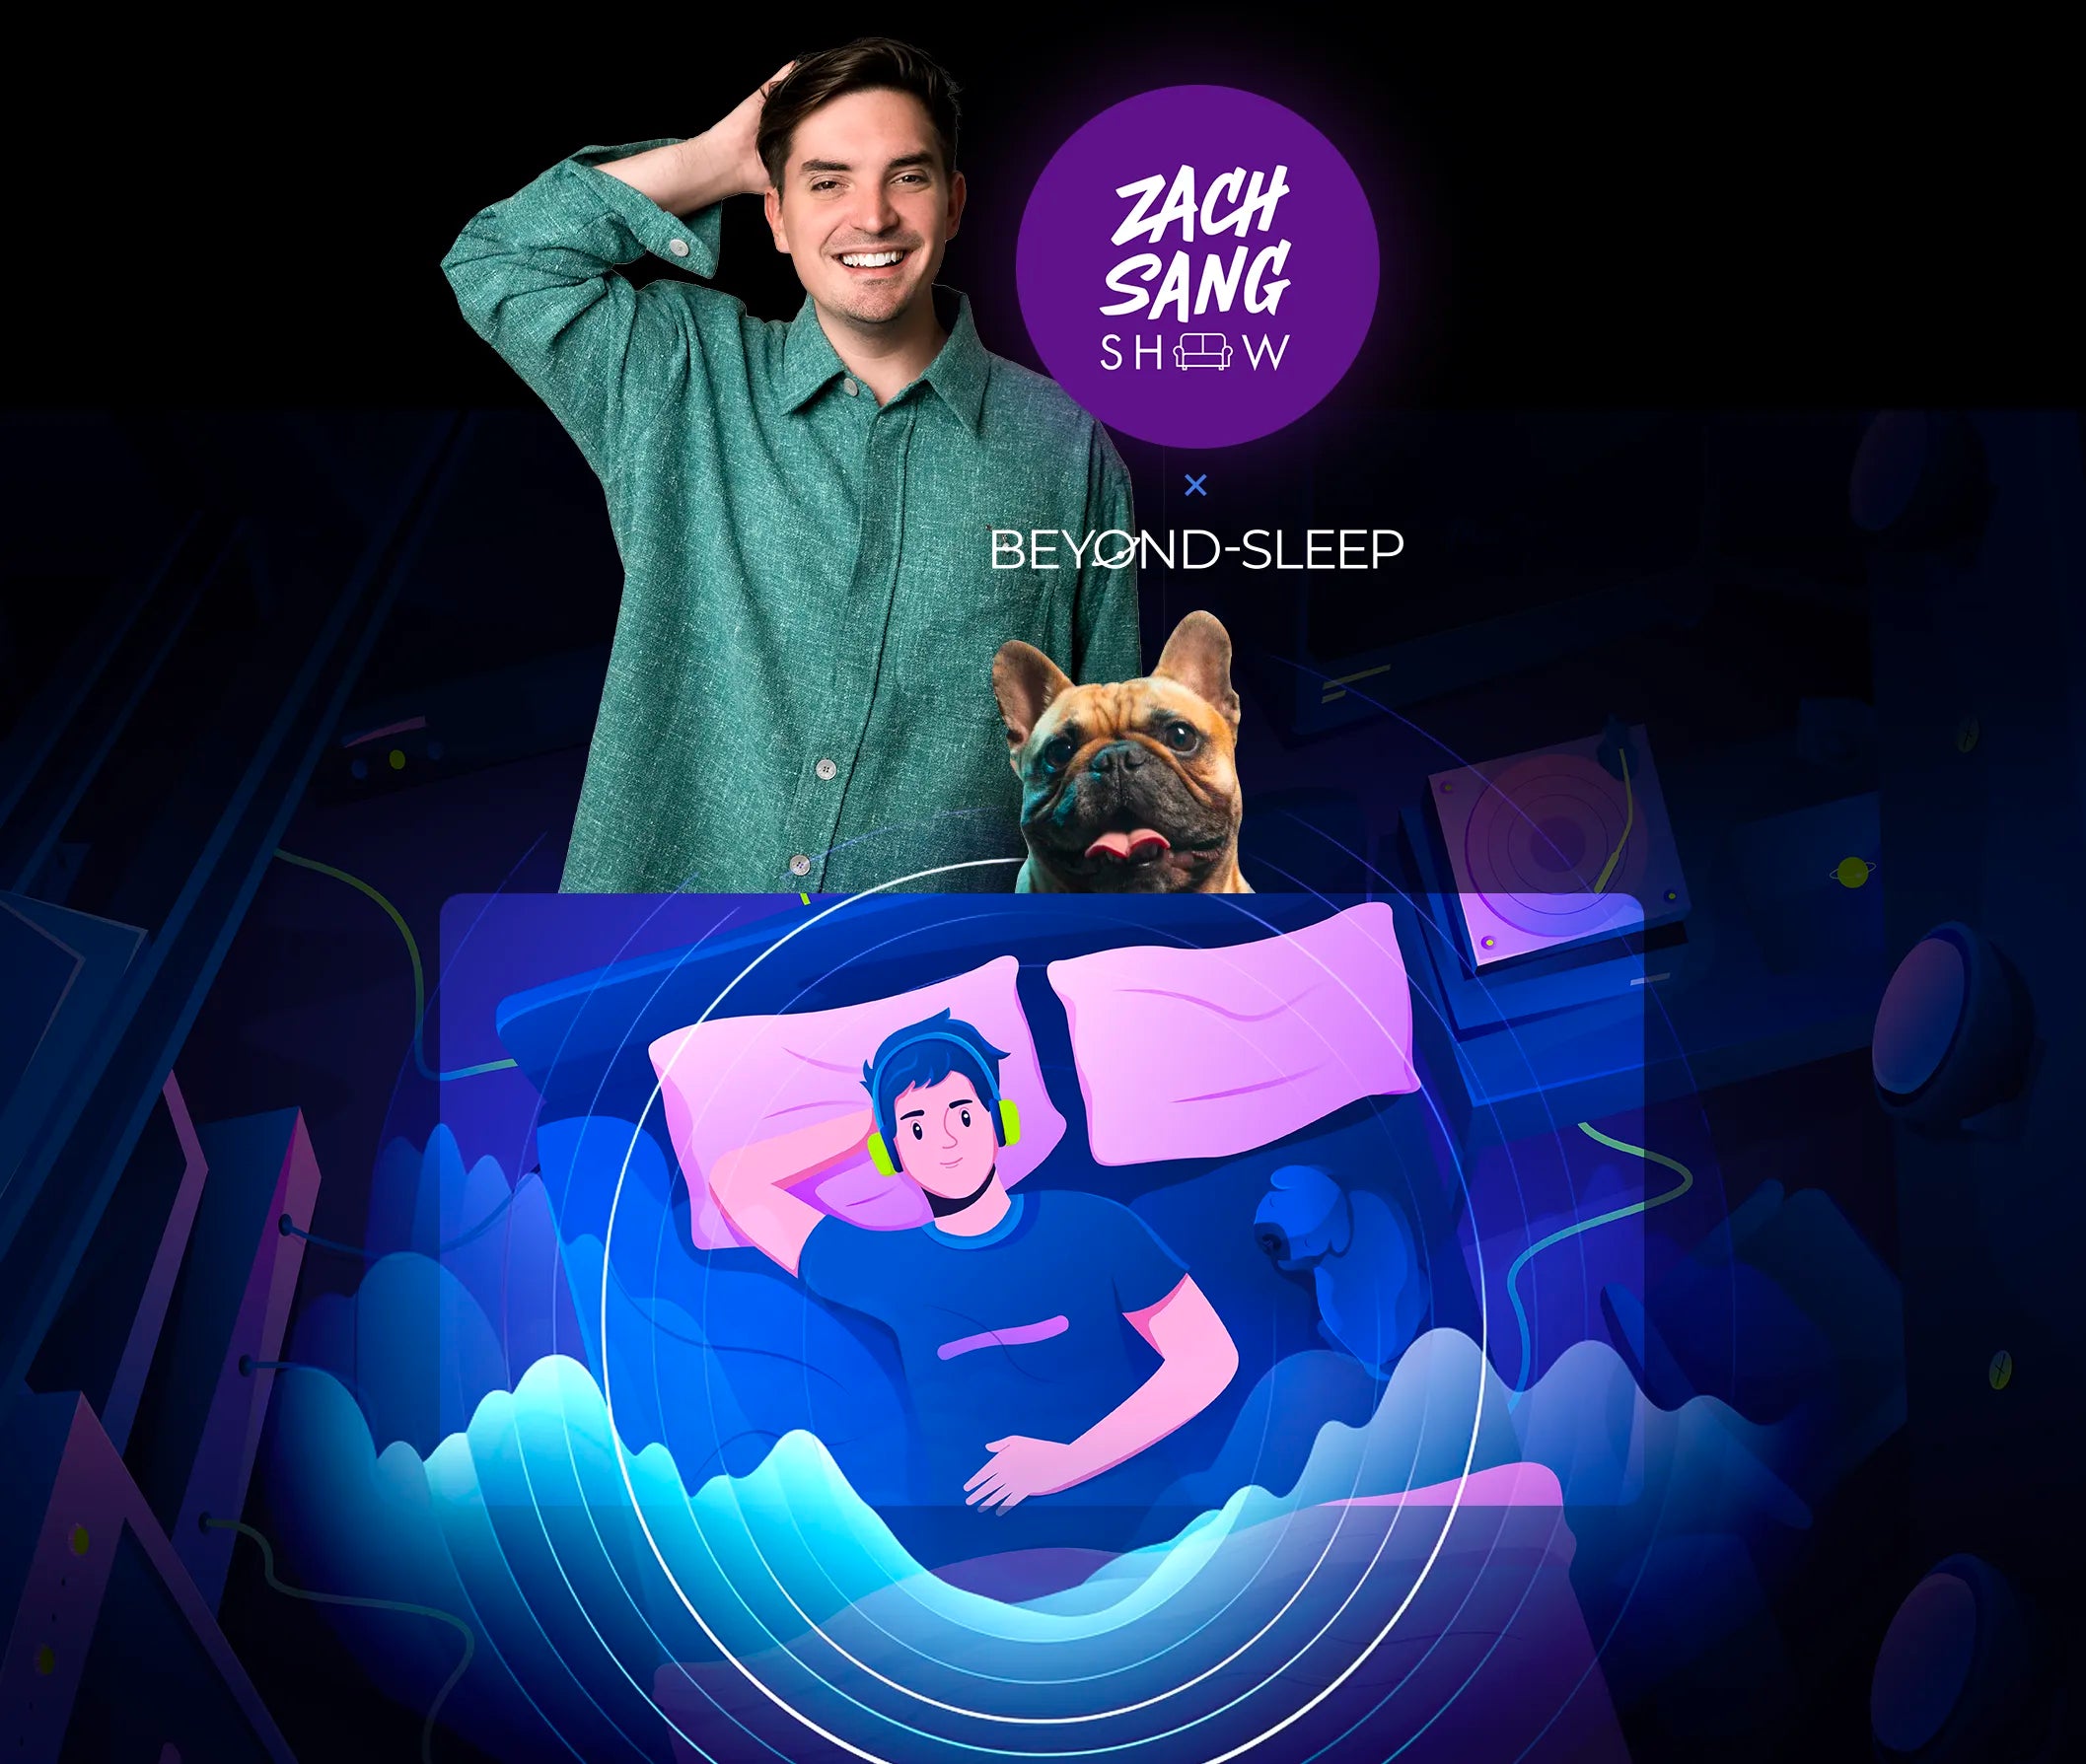 Beyond-Sleep and Media Icon Zach Sang Partner for a Holiday Mattress Giveaway